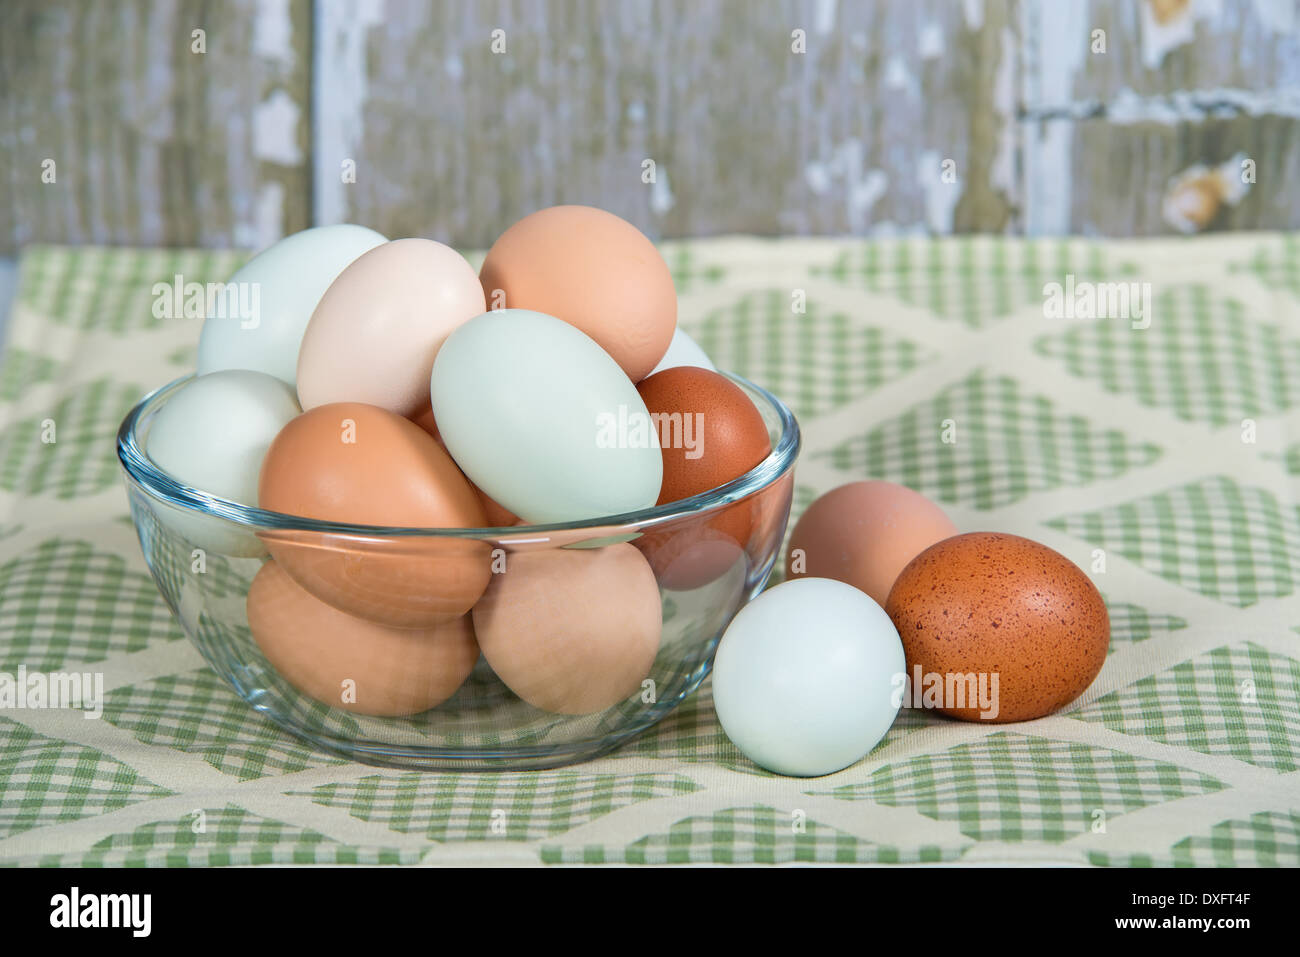 Assortment of different color, fresh, chicken eggs in a glass bowl. Background country kitchen style. Stock Photo